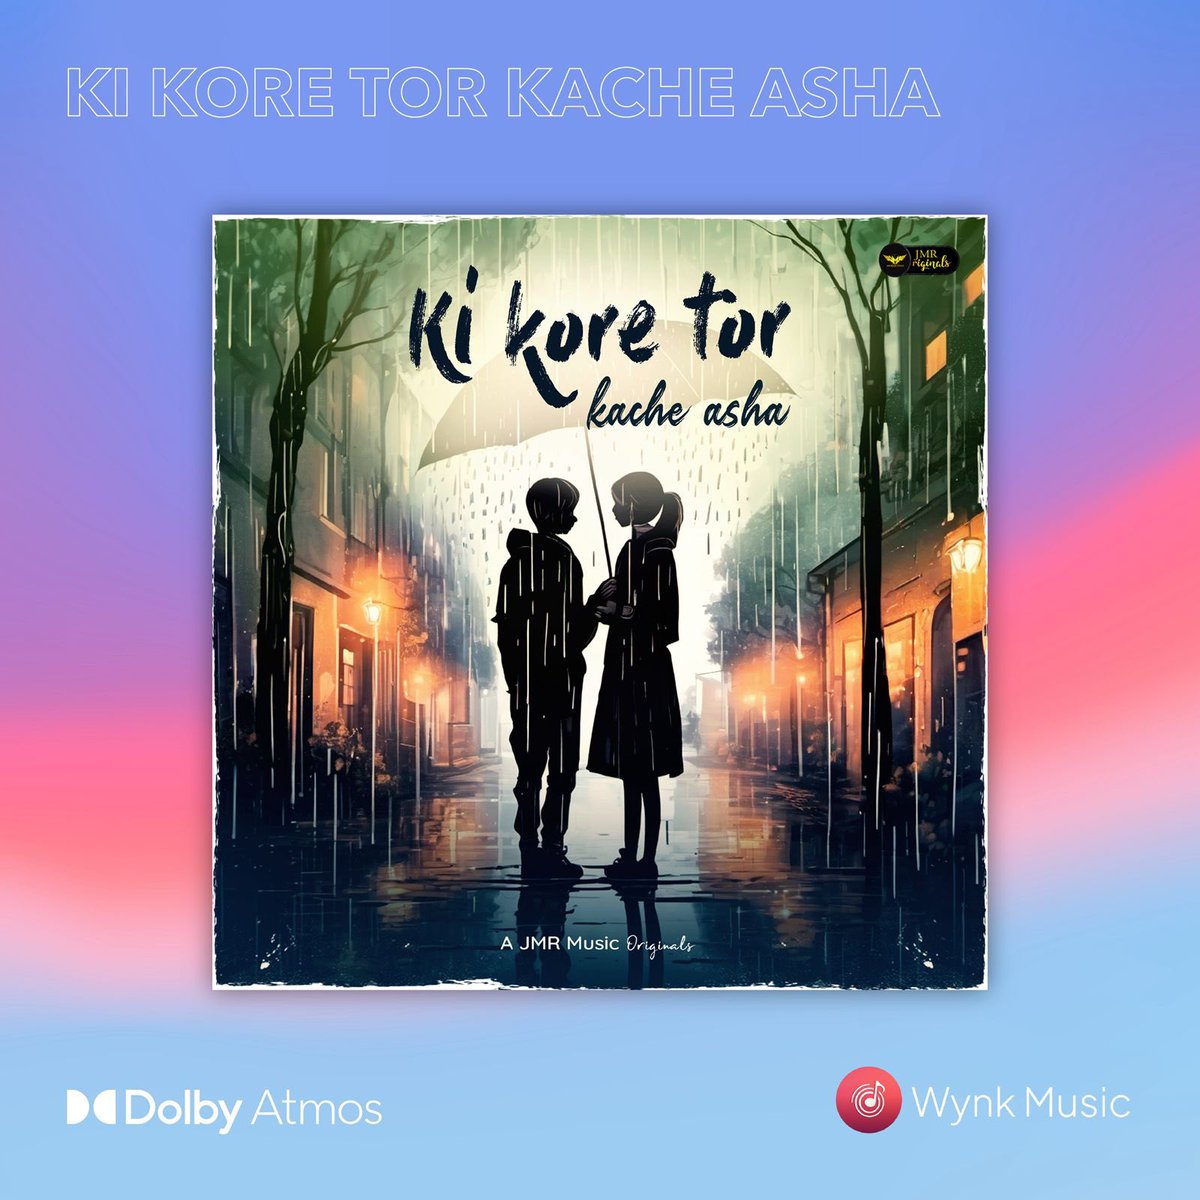 Dive into the soulful melody of ‘Ki Kore Tor Kache Asha’ in #DolbyAtmos on Wynk Music. Get @WynkMusic today. #LoveMusicMoreInDolby #MusicInDolby #DolbyOnWynk